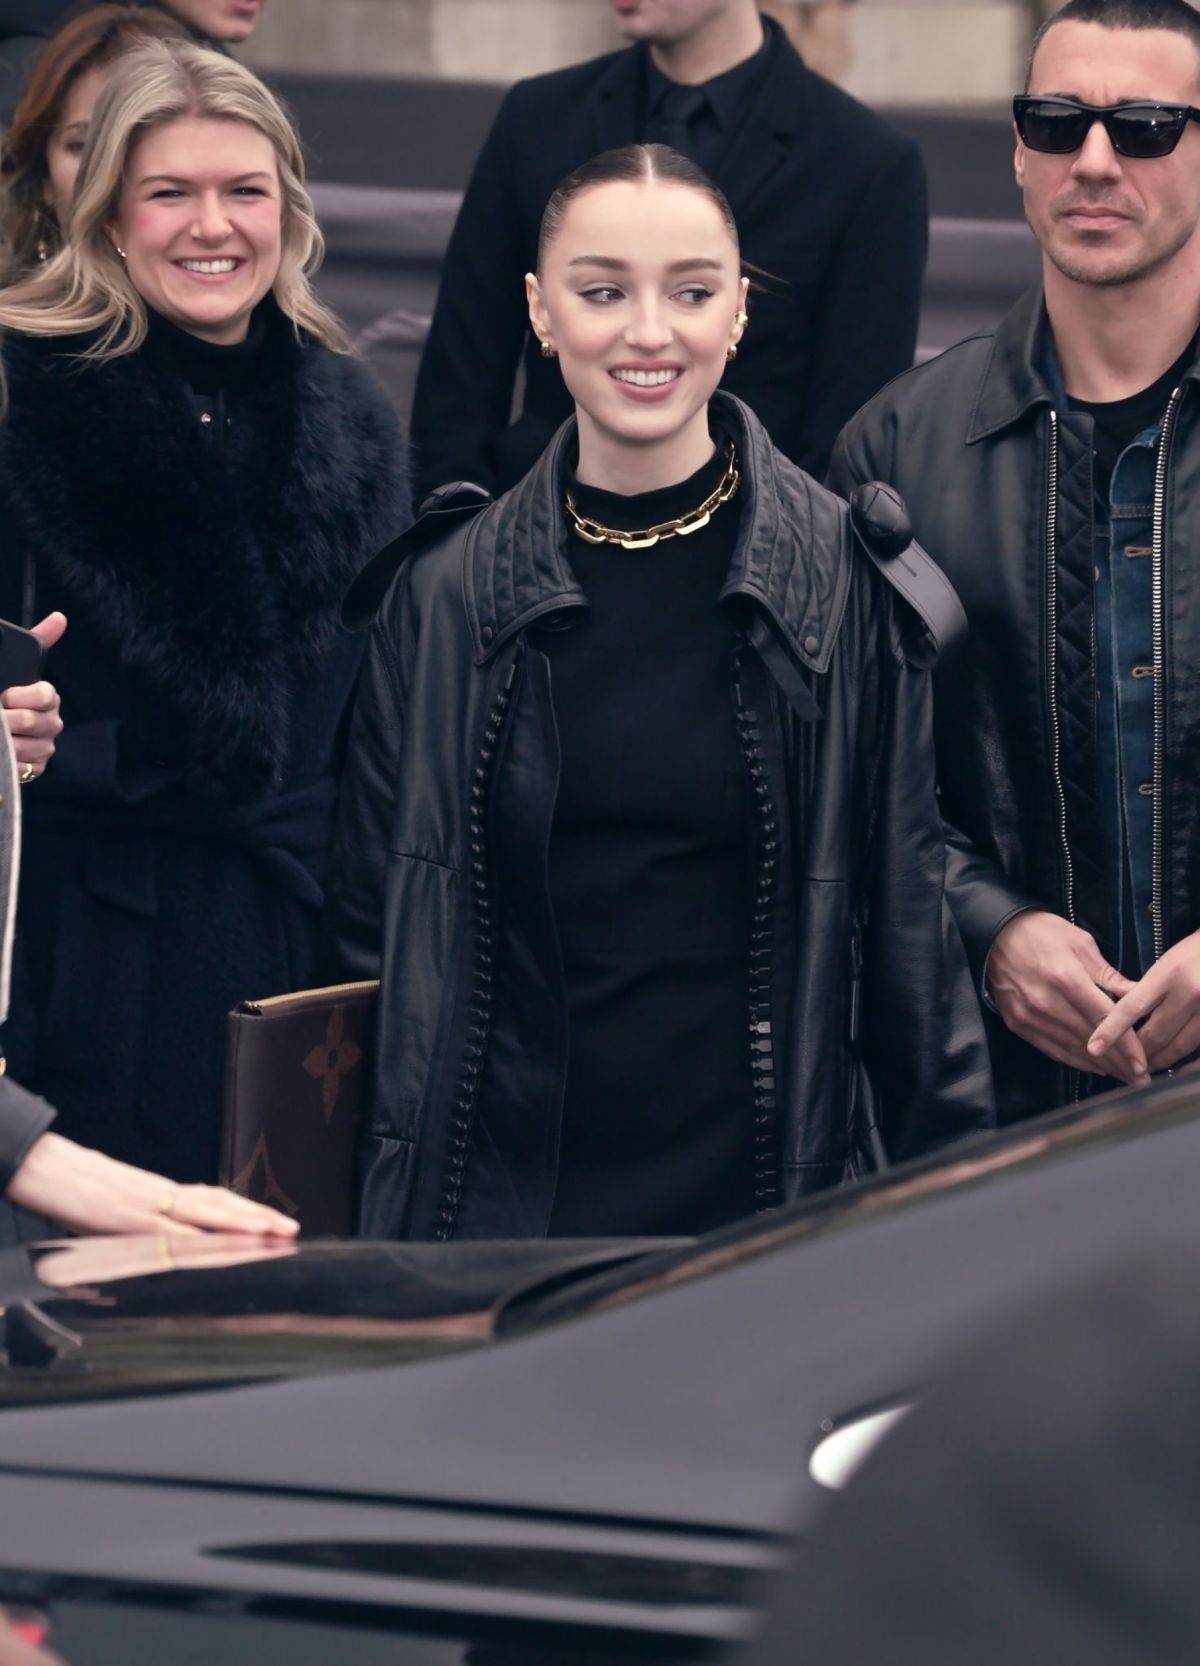 Phoebe Dynevor Louis Vuitton Show March 6, 2023 – Star Style